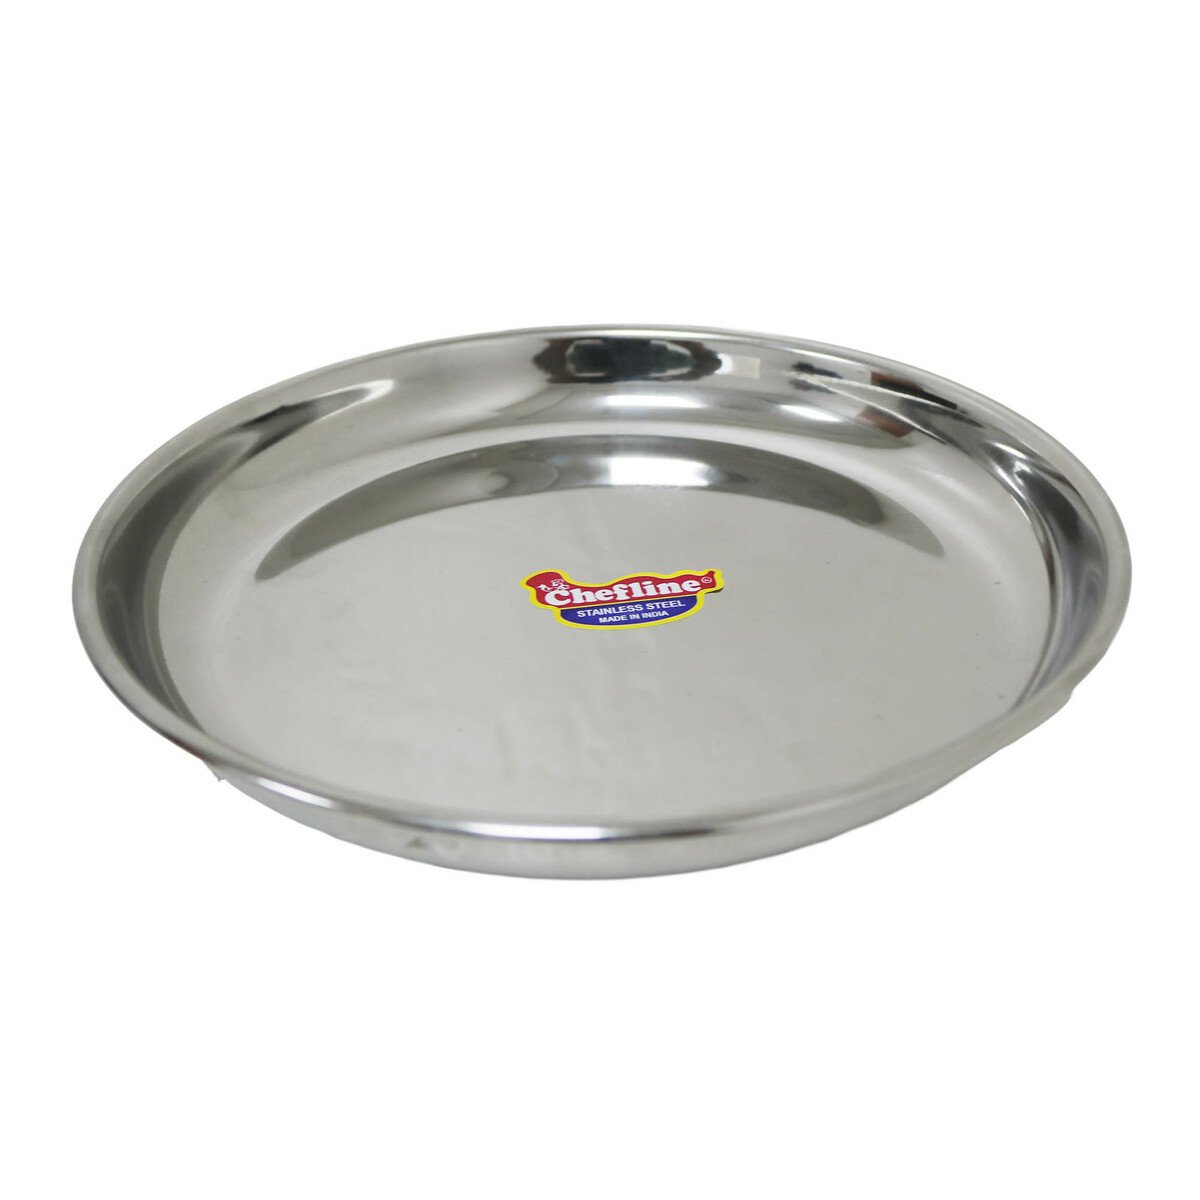 Chefline Stainless Steel Halwa Plate No.11 Ind